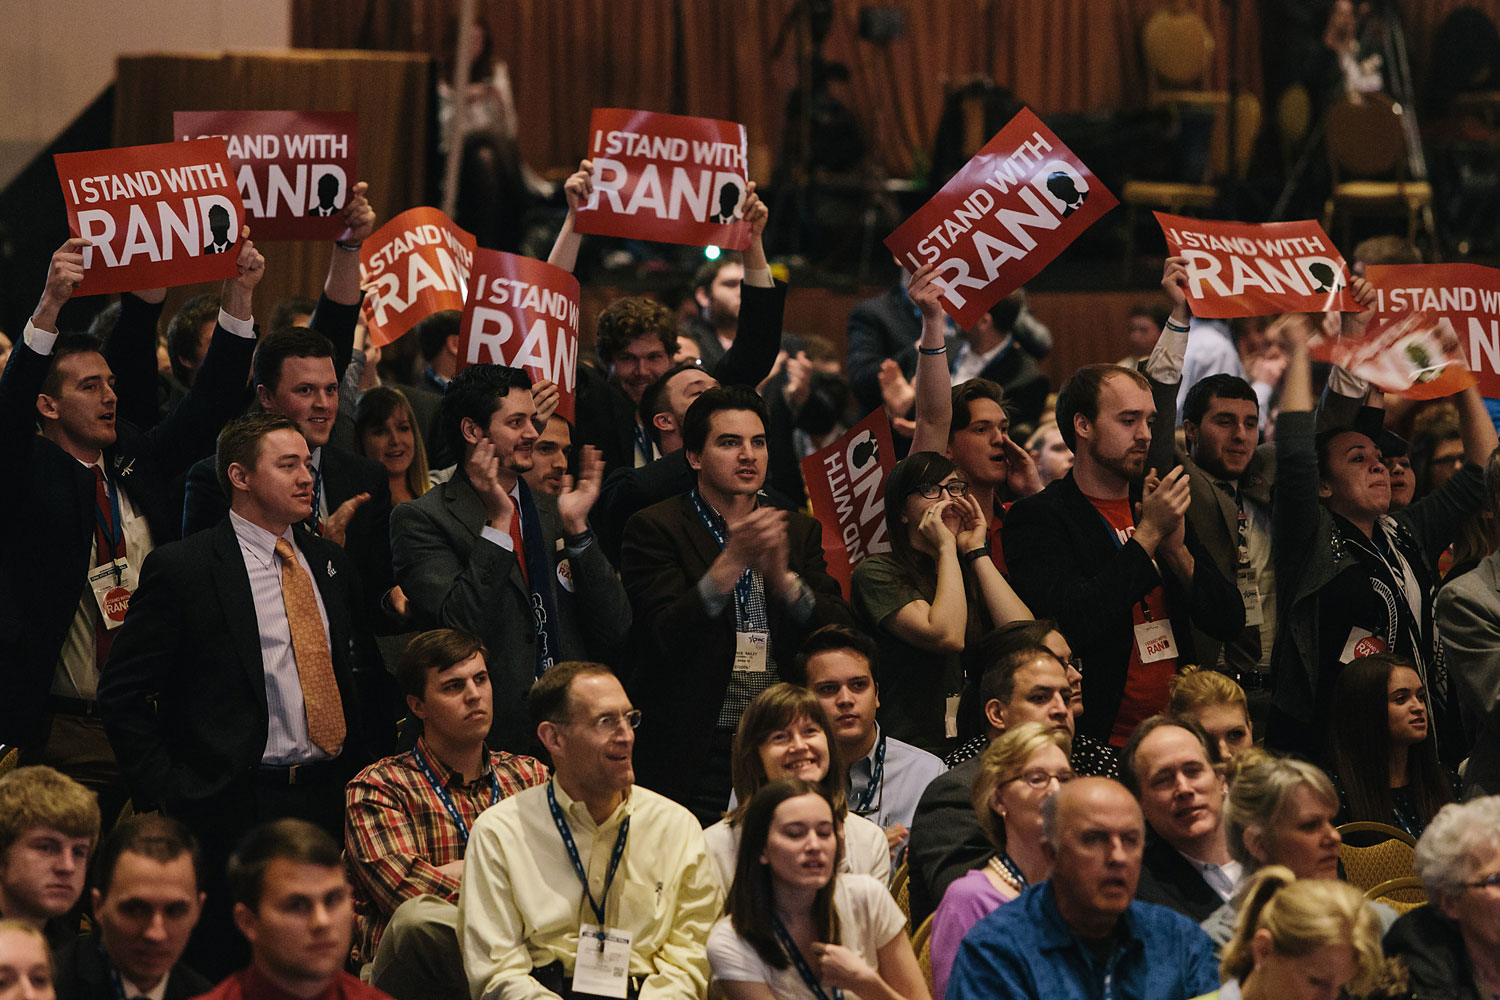 Rand Paul supporters stand and cheer when the results of a straw poll show Rand Paul winning the GOP Presidential nomination during the final day of the Conservative Political Action Conference (CPAC) at the Gaylord National Resort &amp; Convention Center in National Harbor, Md. (Lexey Swall—GRAIN for TIME)